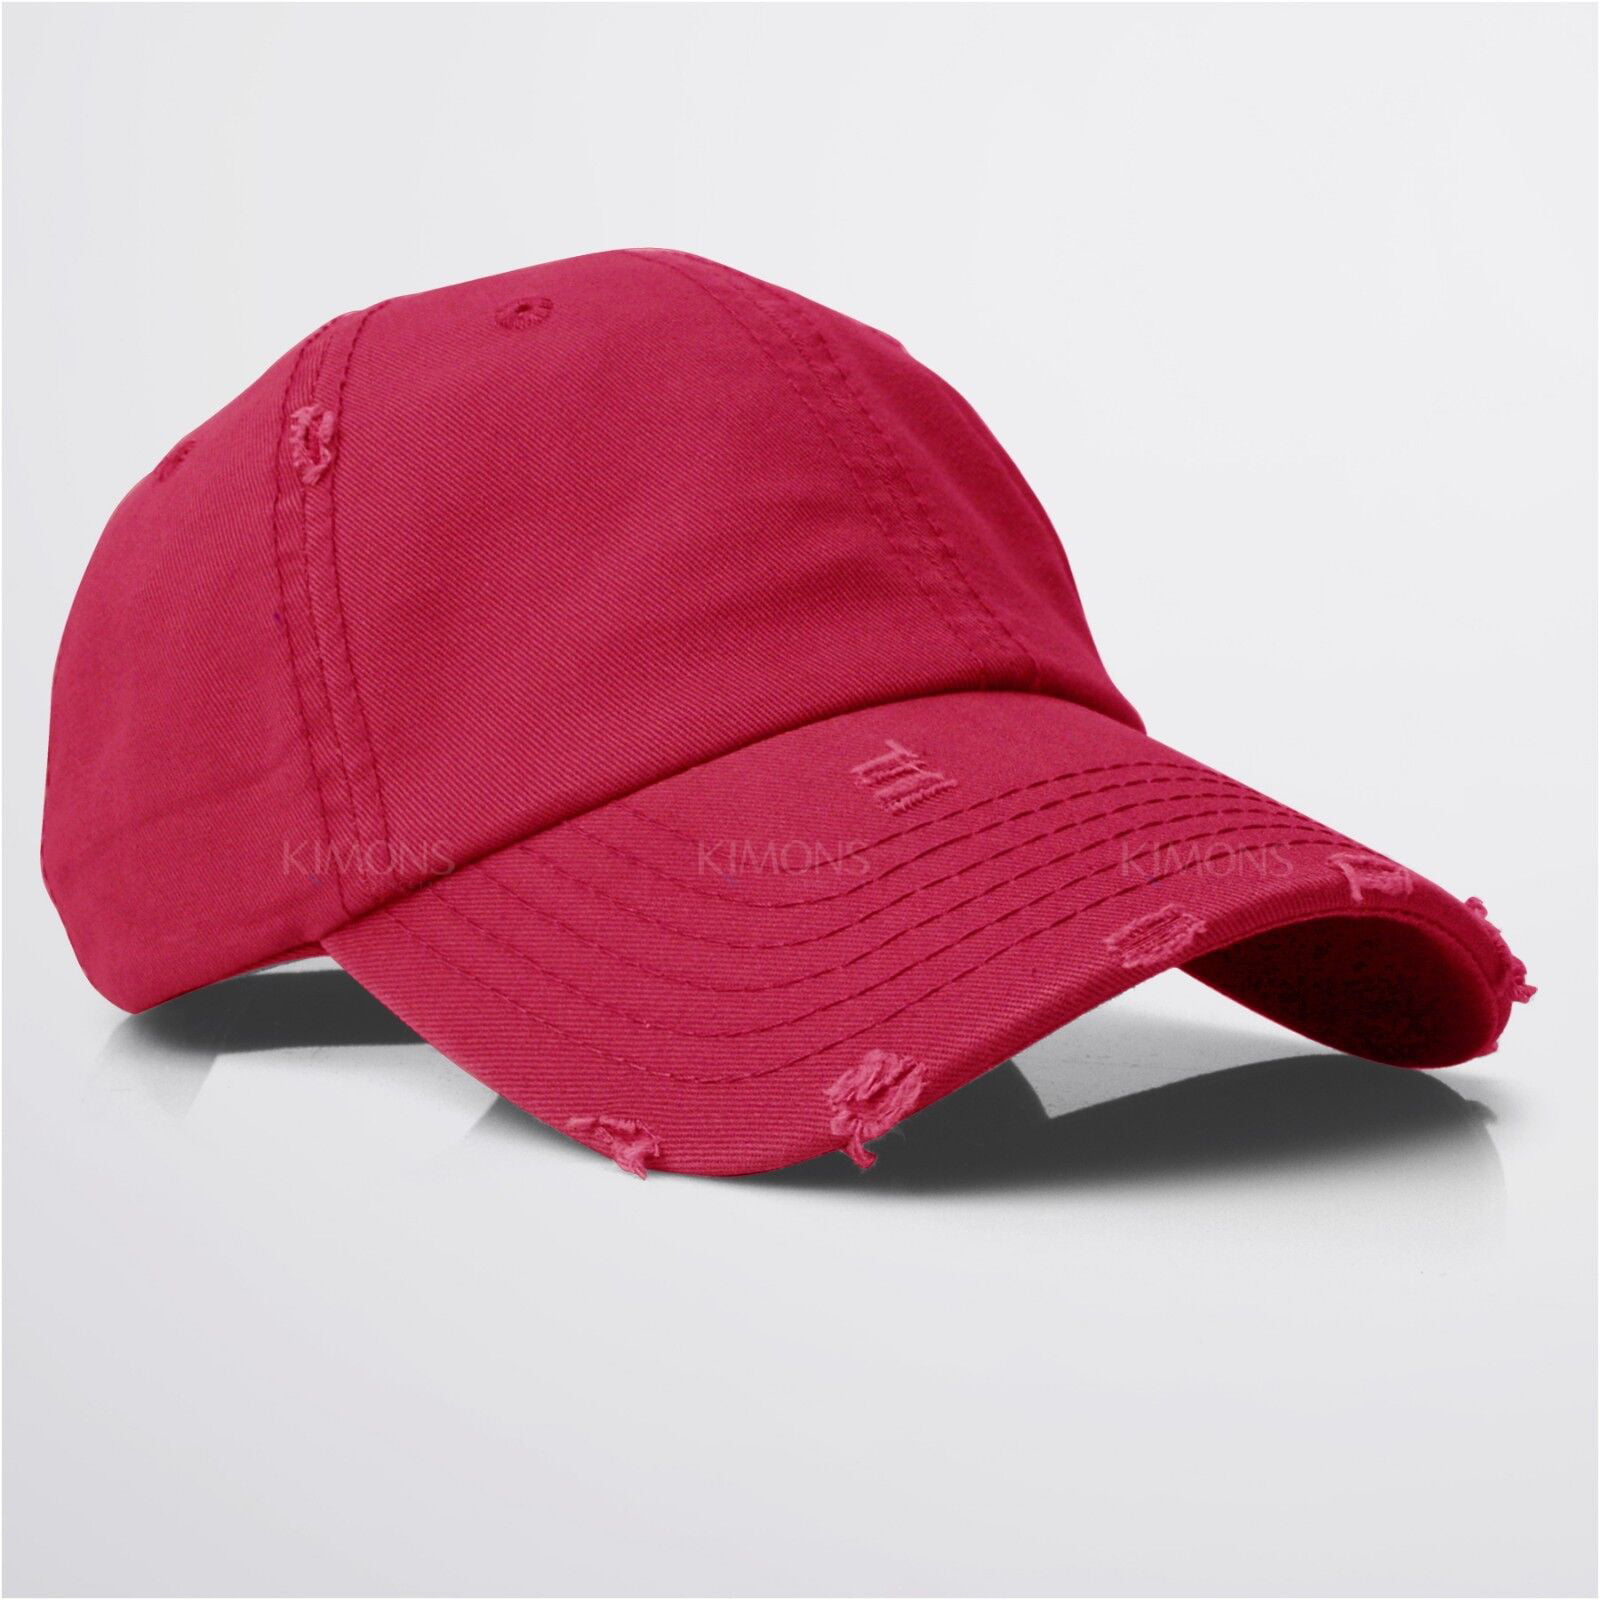 Adelaide Intimidatie is meer dan Vintage Distressed 100% Cotton Solid Polo Denim Baseball Cap Hat Ball Dad  Washed, 10-RED - Walmart.com